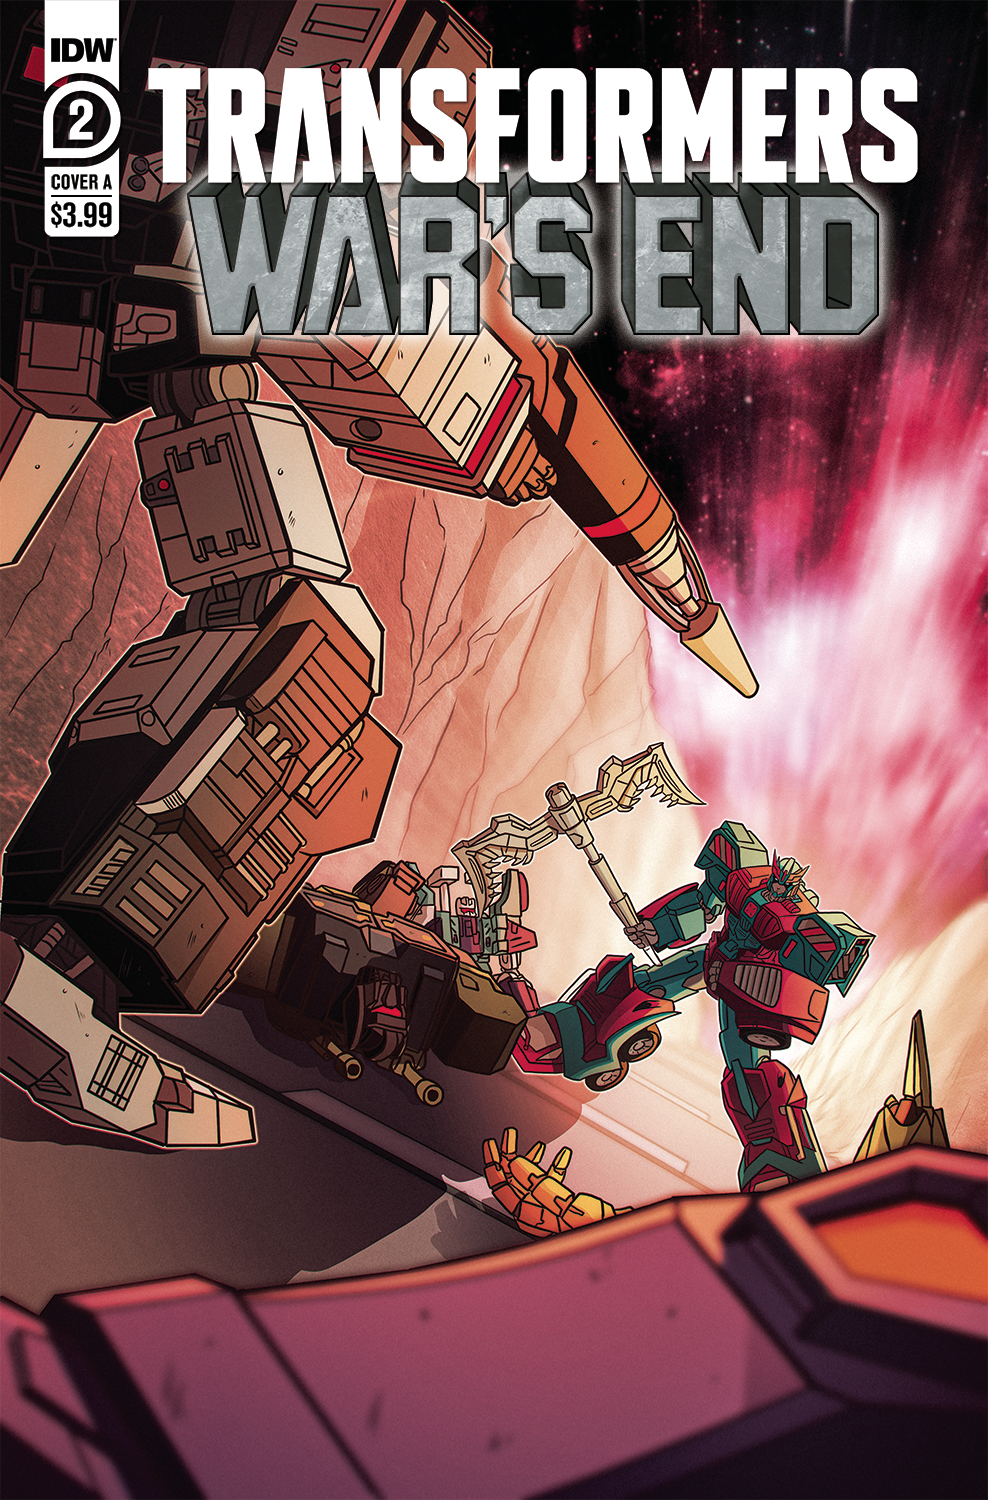 Transformers Wars End #2 Cover A Chris Panda (Of 4)